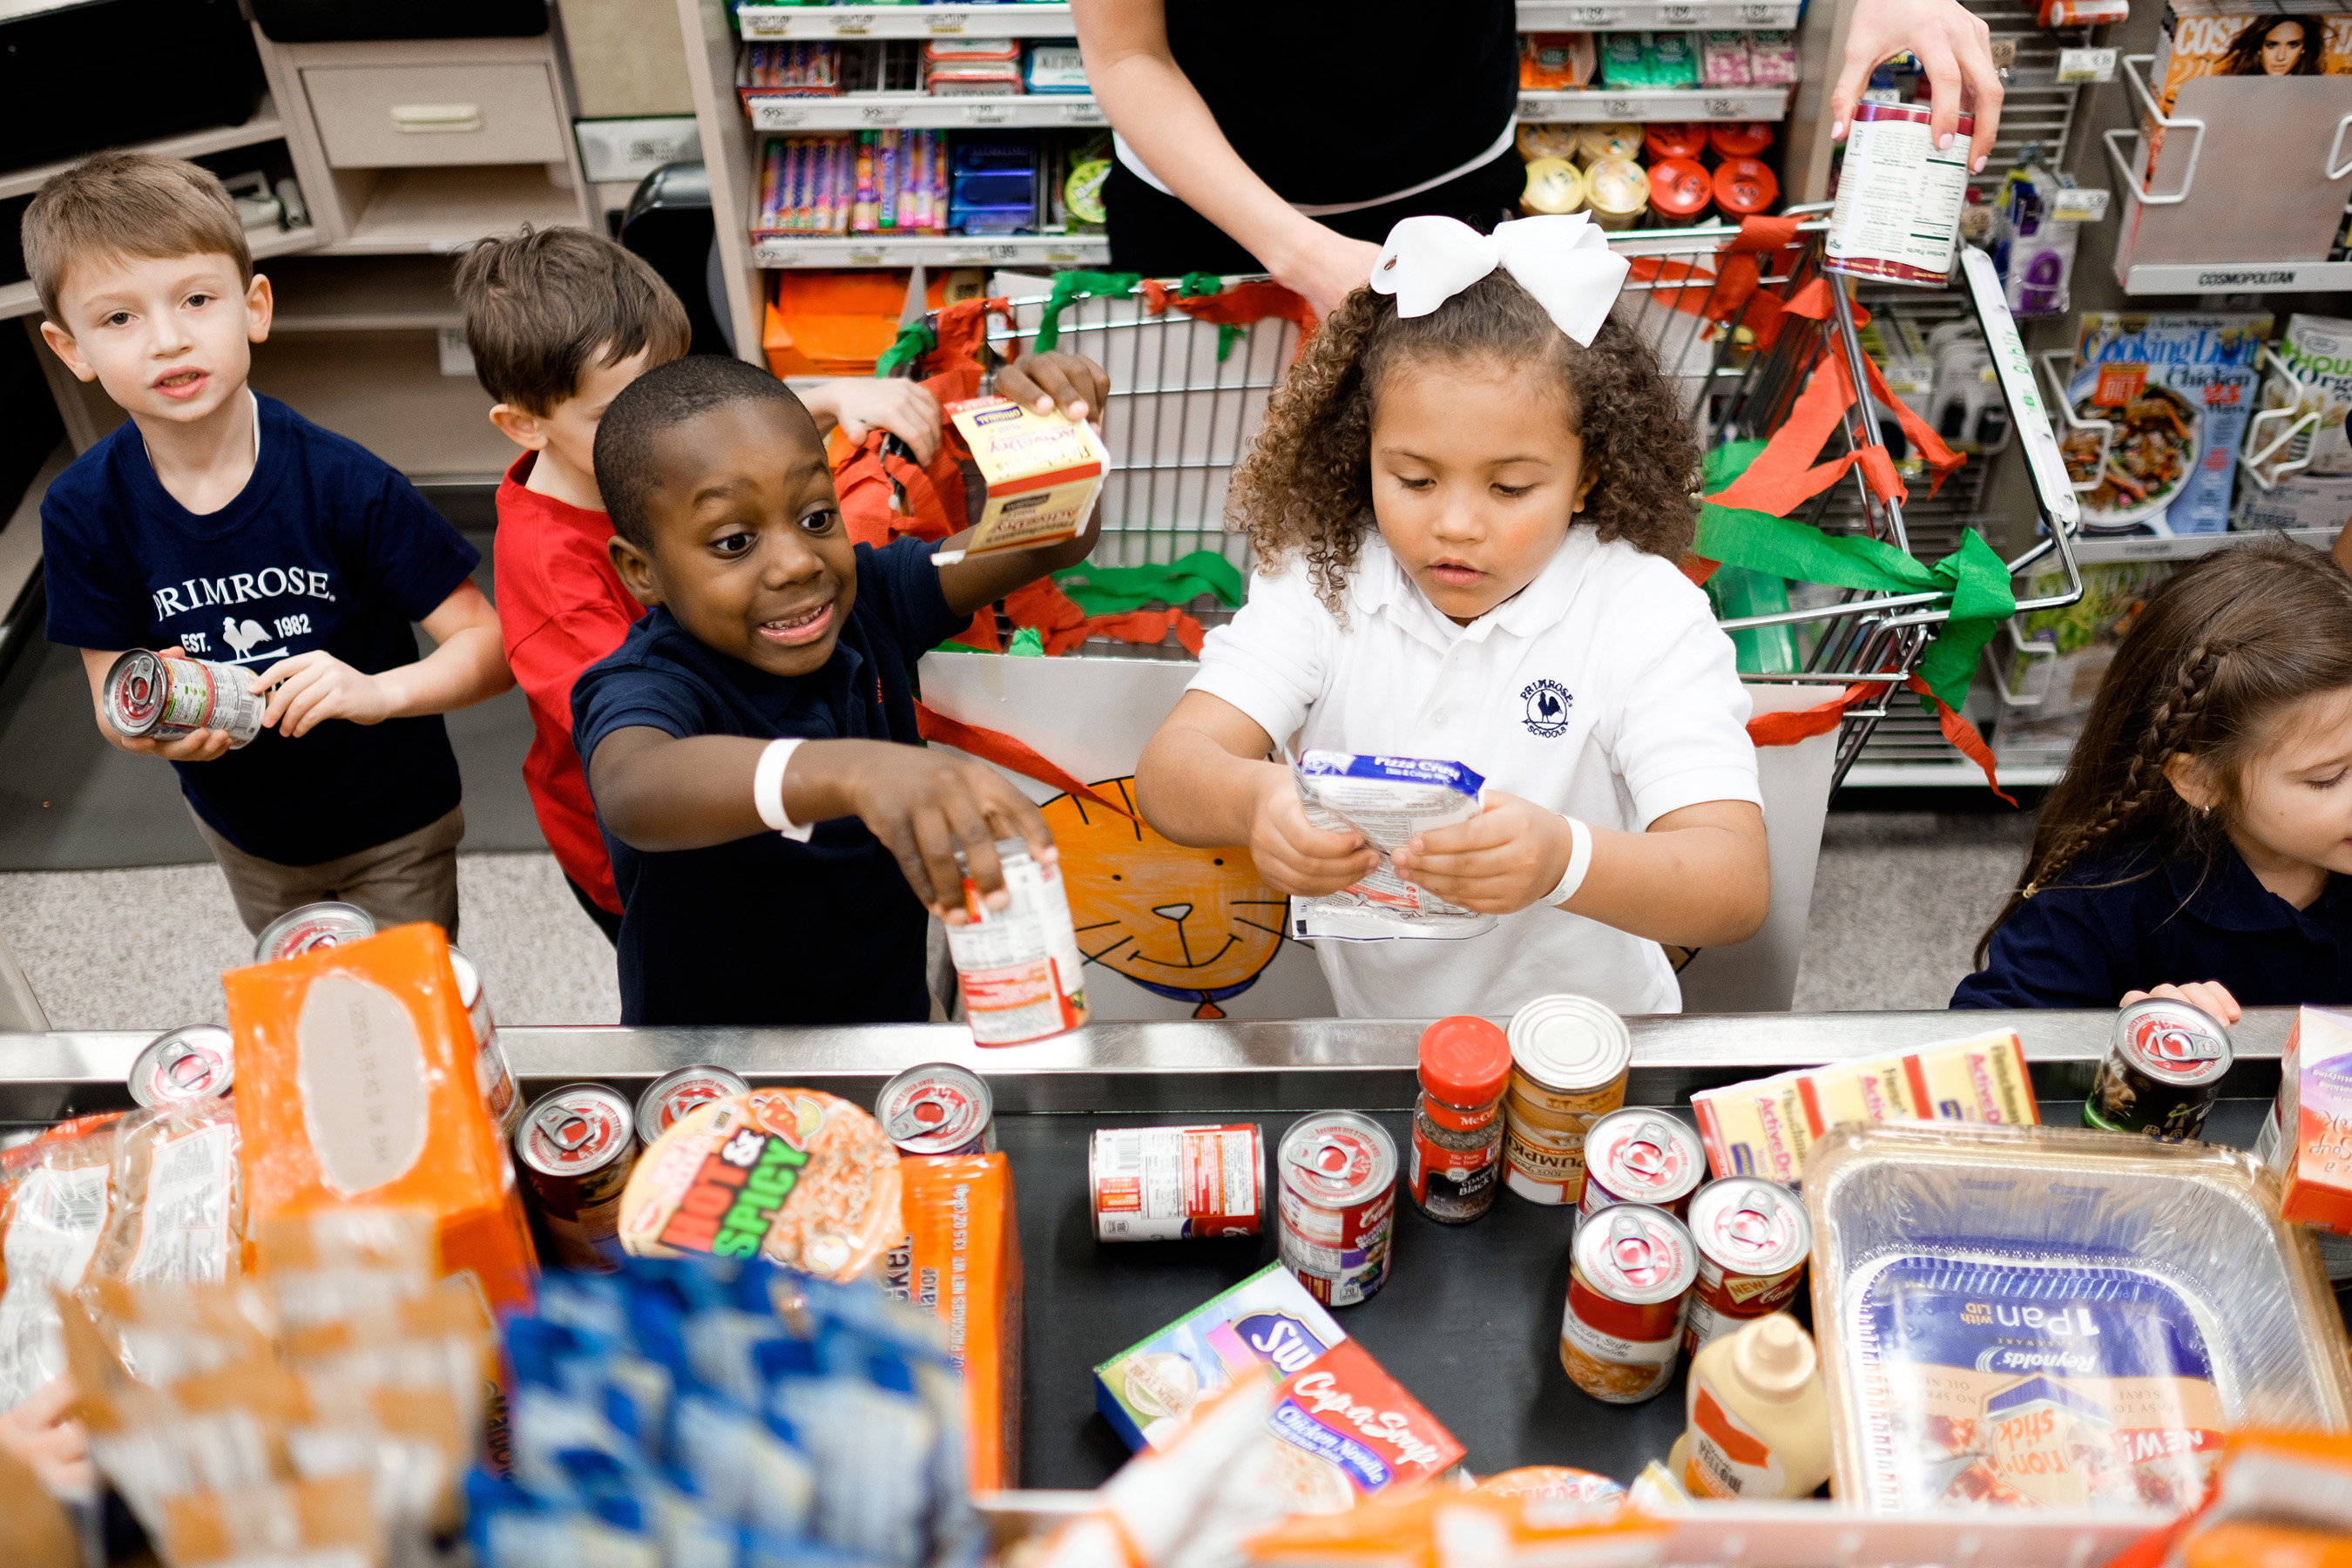 Through the Primrose Caring and Giving Food Drive, children learn empathy and begin to understand the value of giving to those in need.